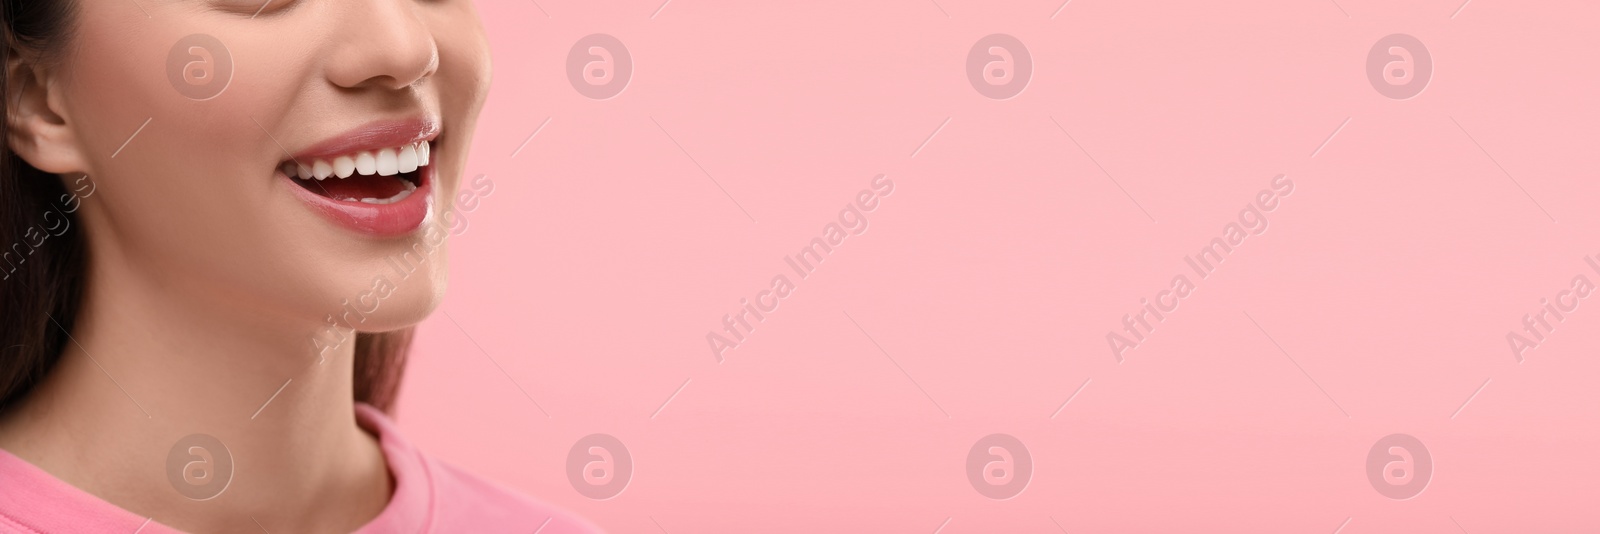 Image of Woman with clean teeth smiling on pink background, closeup. Banner design with space for text